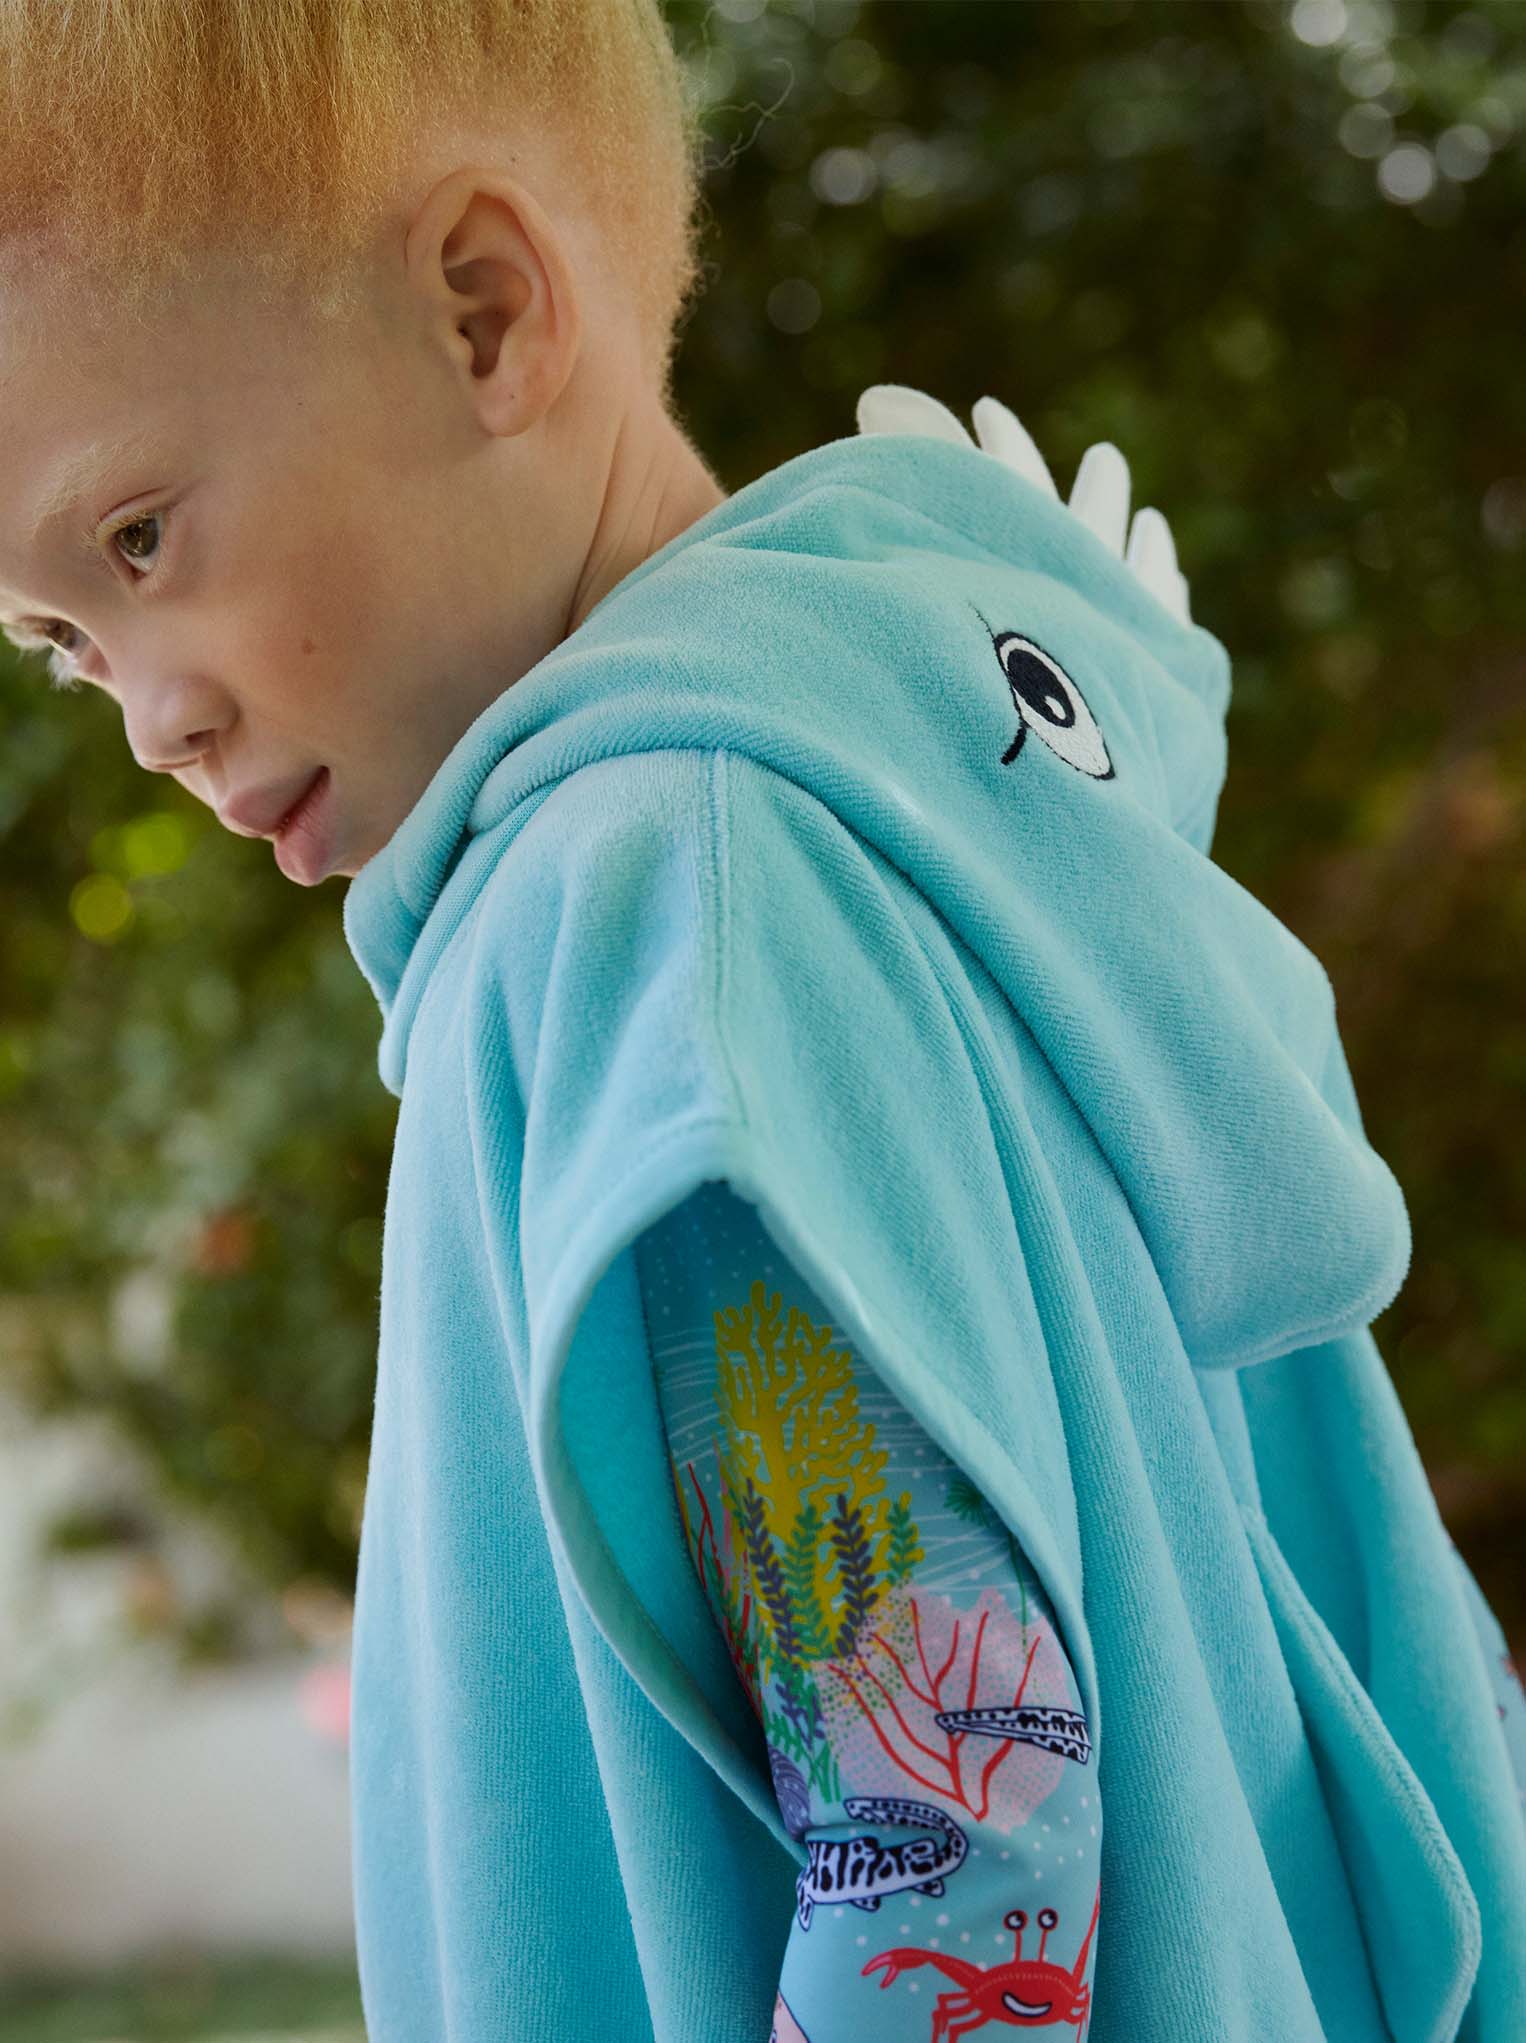 Blue Shark Kids Swim Beach Towel from Polarn O. Pyret Kidswear. Made using sustainable sourced materials.